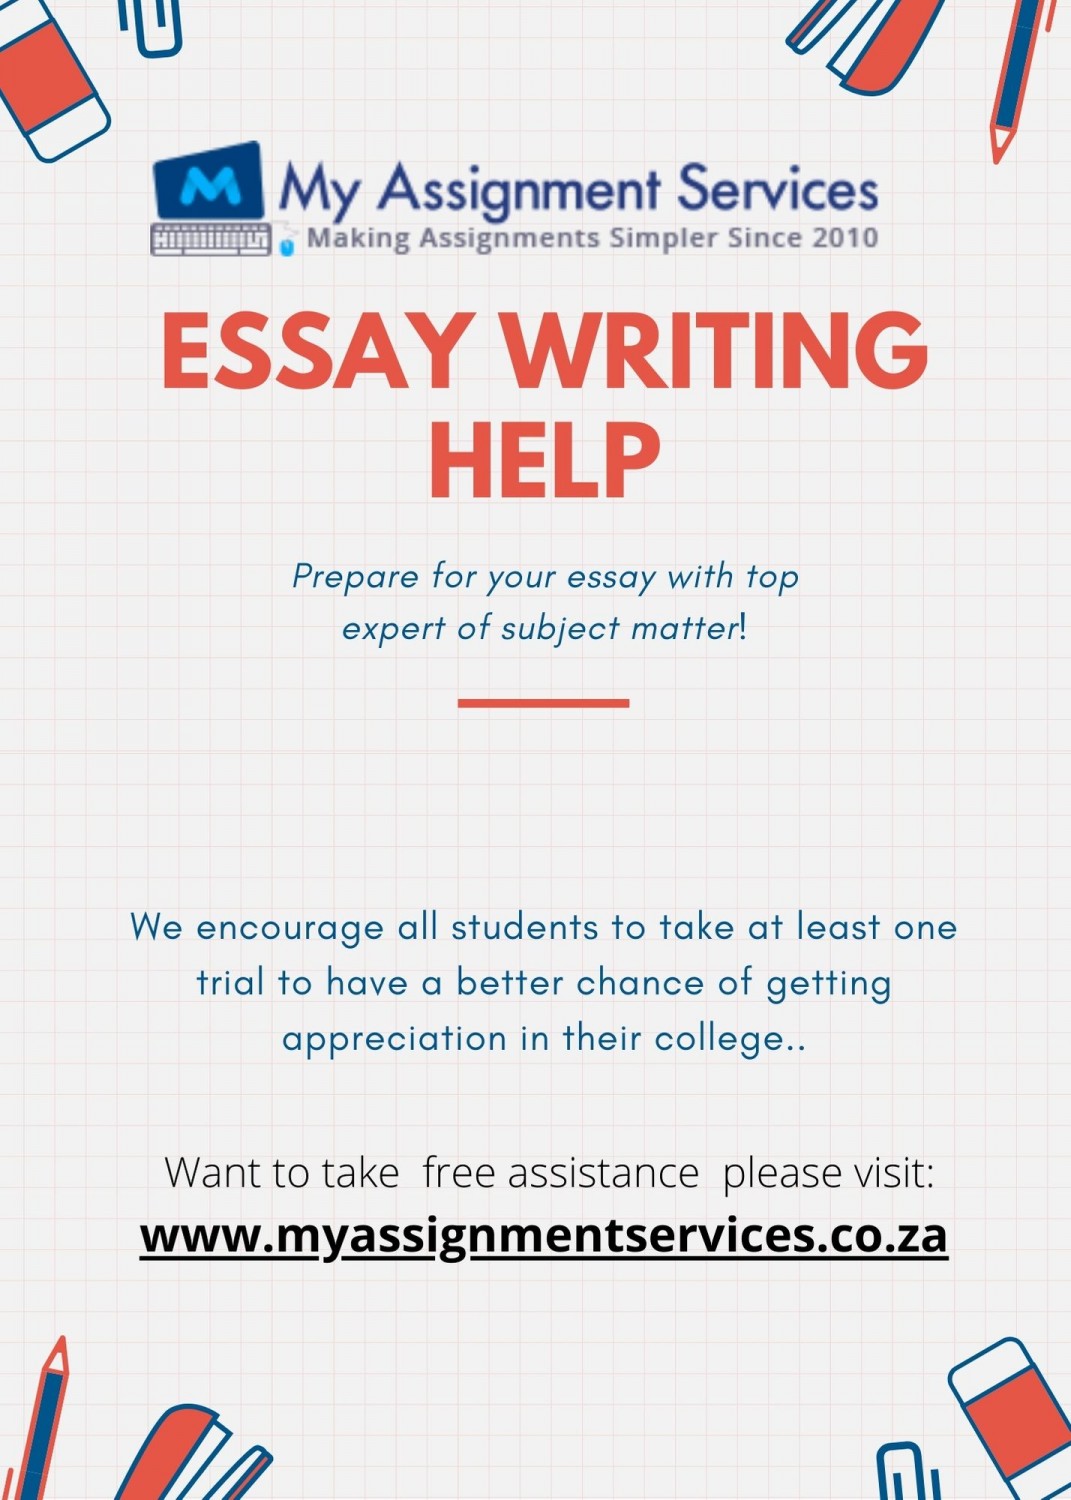 A flyer poster shows about essay writing help